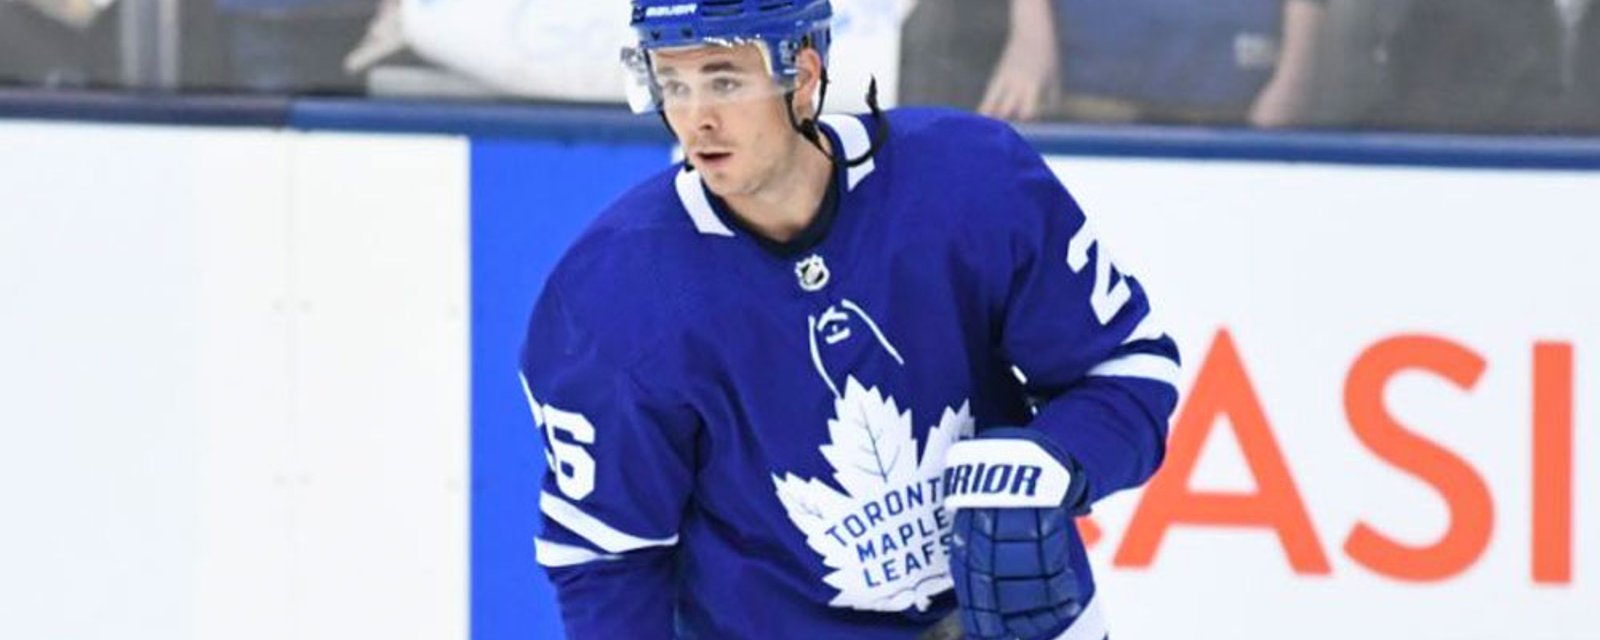 Breaking: Leafs place Shore on waivers and make an AHL call up